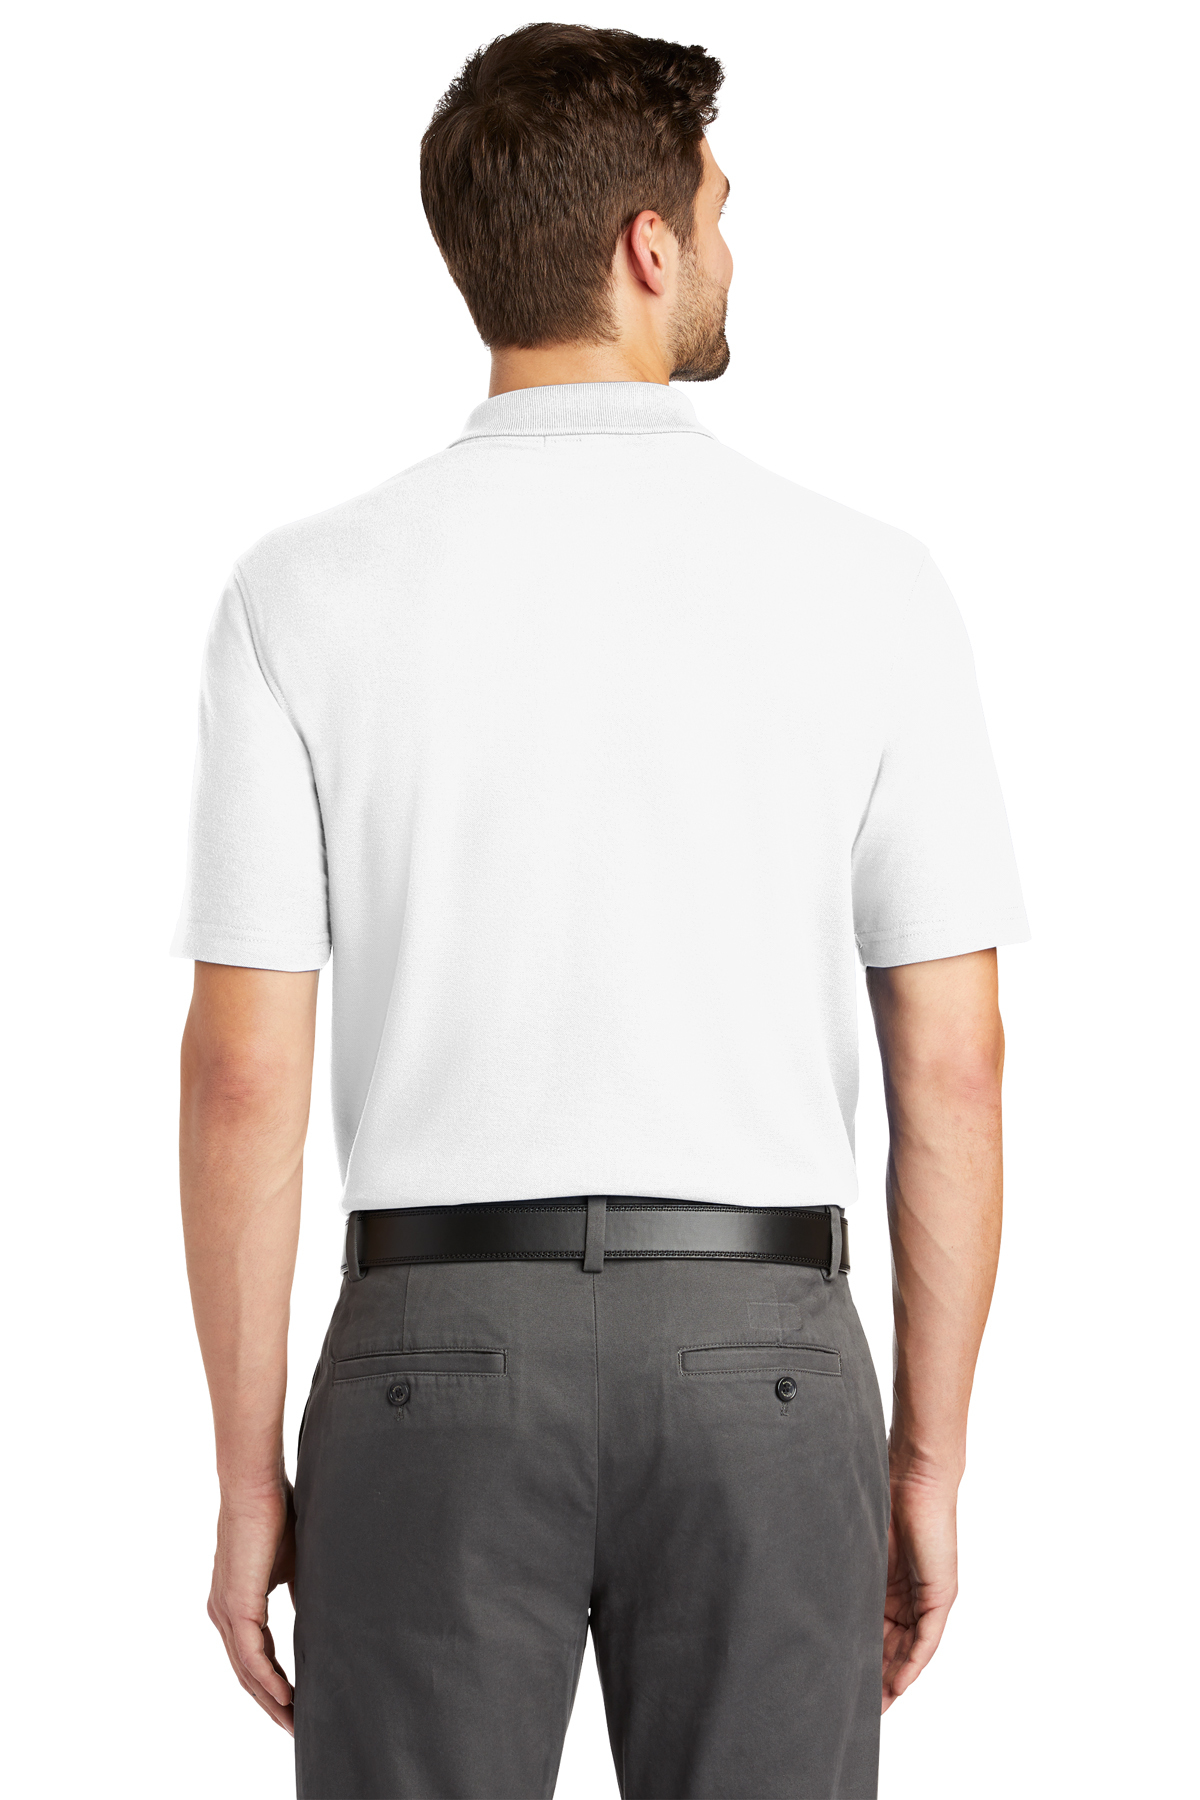 Port Authority Stain-Release Polo | Product | SanMar